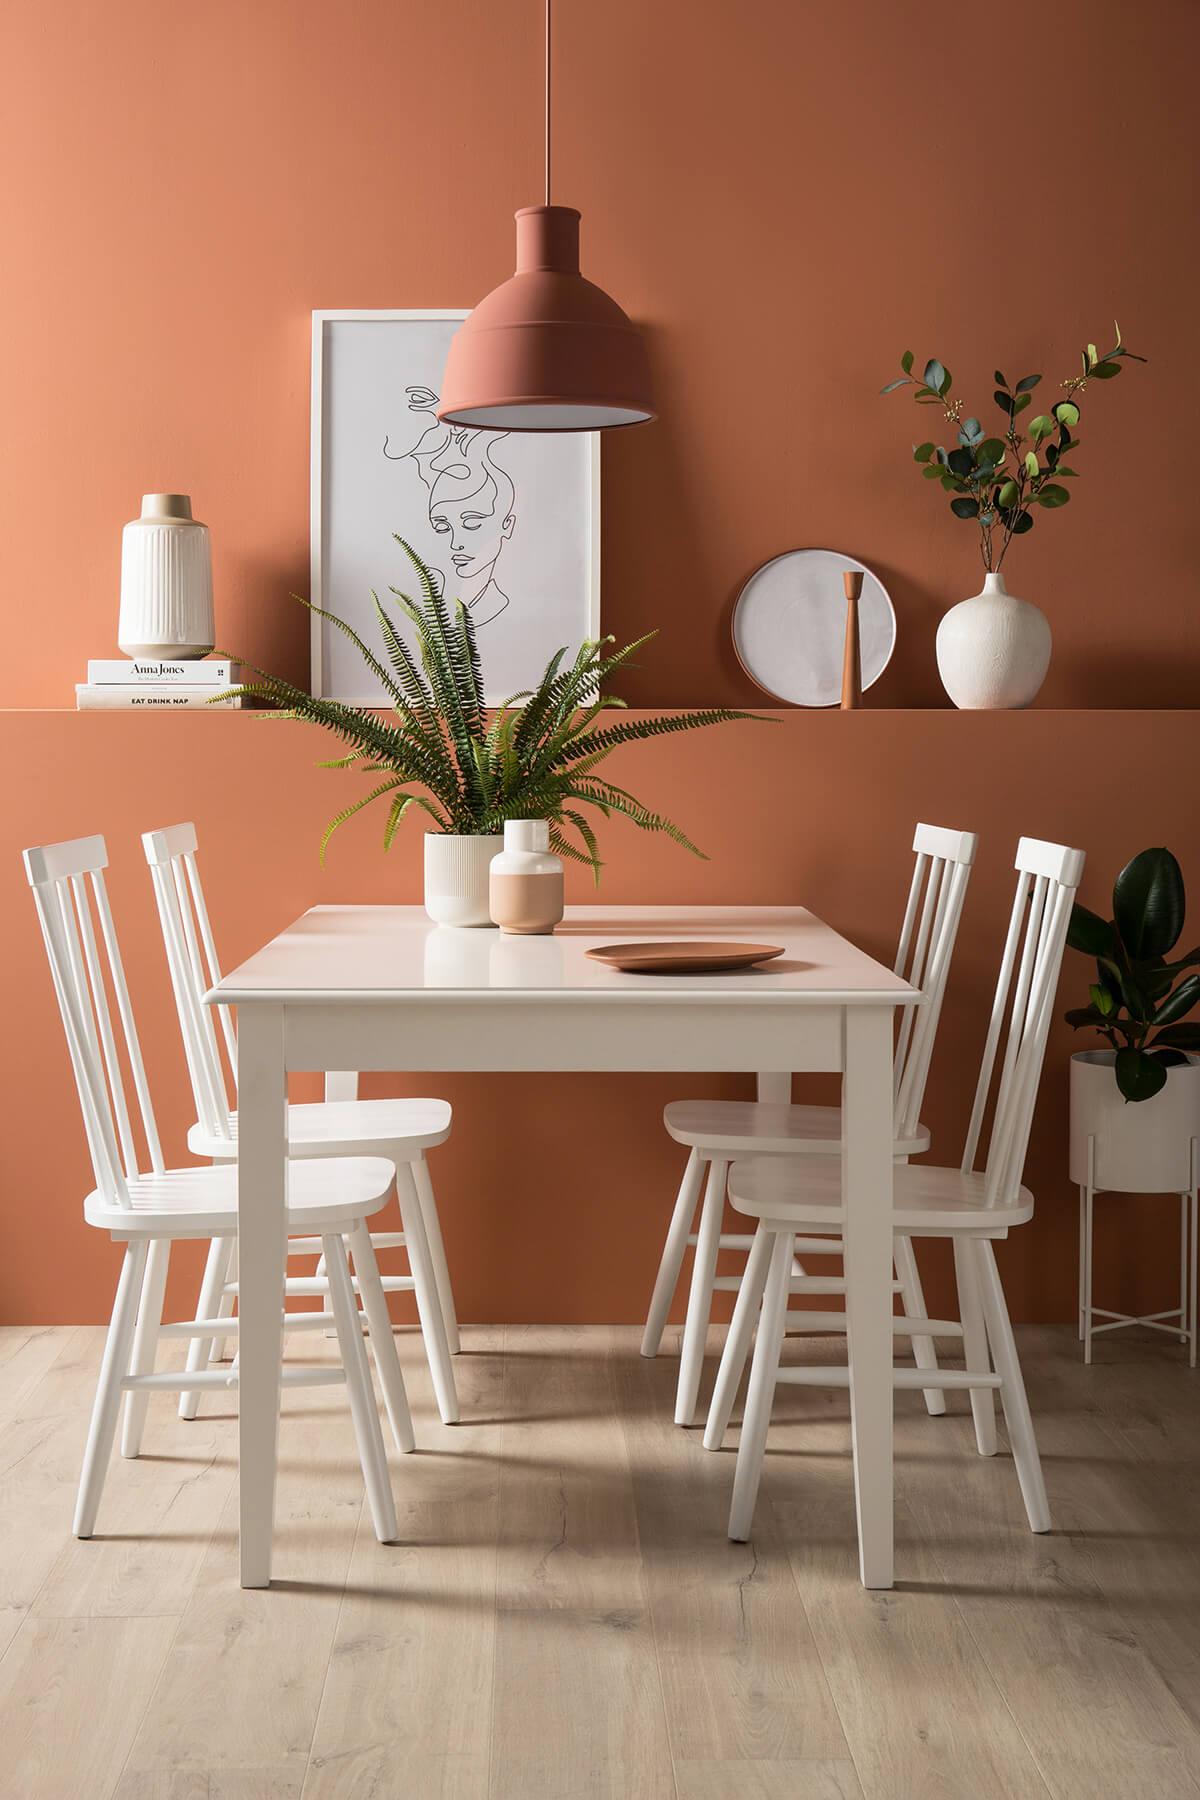 Nordic design inspired dining room with canyon clay walls and white dining set.